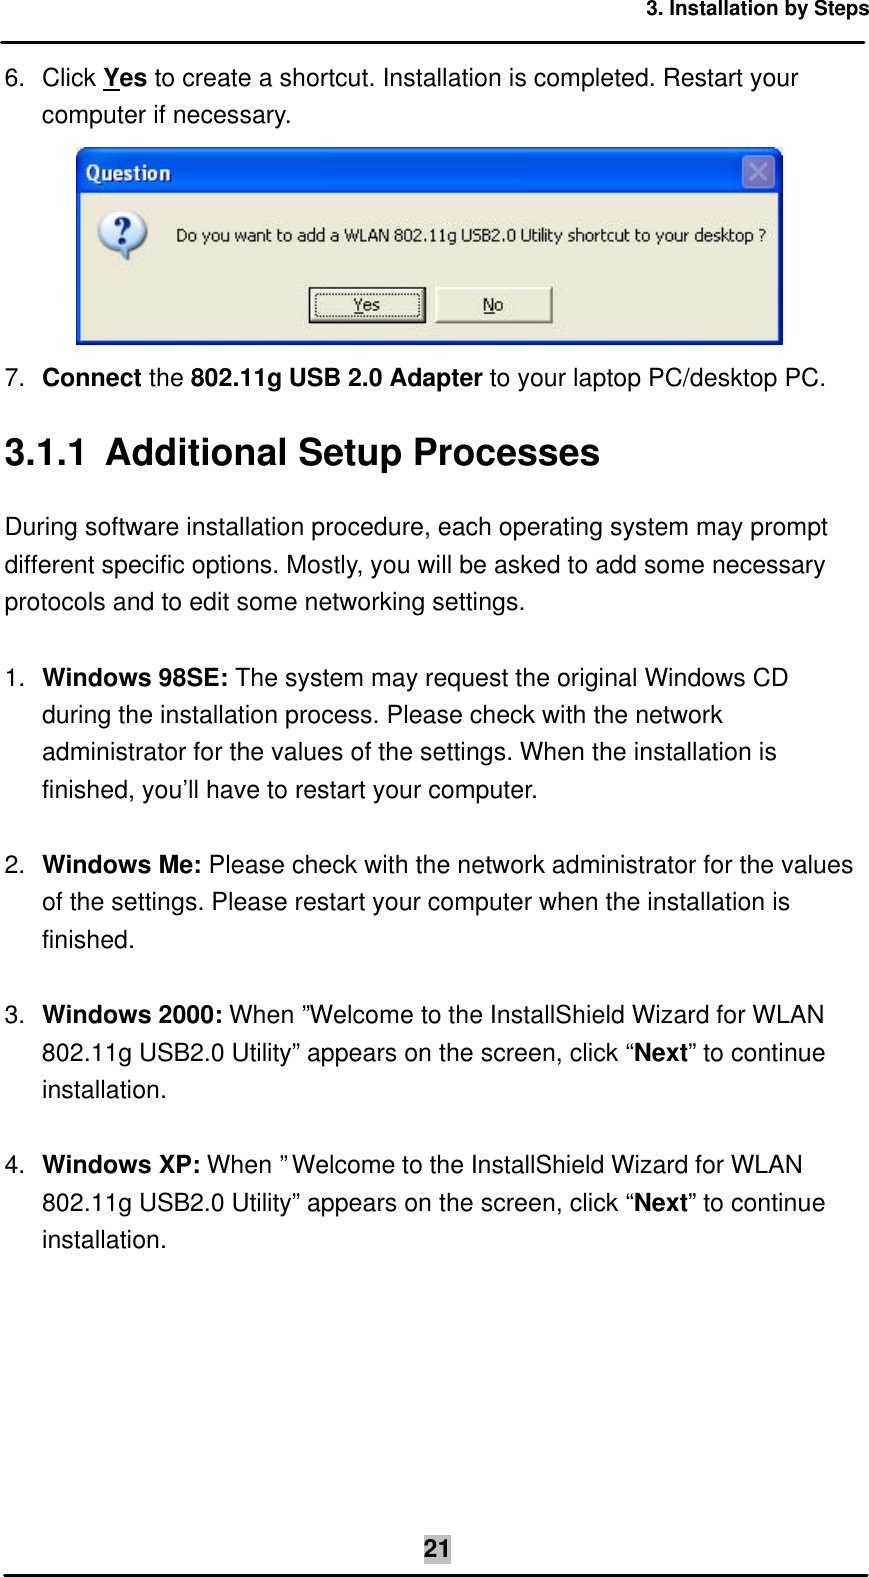 3. Installation by Steps  216. Click Yes to create a shortcut. Installation is completed. Restart your computer if necessary.  7. Connect the 802.11g USB 2.0 Adapter to your laptop PC/desktop PC. 3.1.1 Additional Setup Processes During software installation procedure, each operating system may prompt different specific options. Mostly, you will be asked to add some necessary protocols and to edit some networking settings.  1. Windows 98SE: The system may request the original Windows CD during the installation process. Please check with the network administrator for the values of the settings. When the installation is finished, you’ll have to restart your computer.  2. Windows Me: Please check with the network administrator for the values of the settings. Please restart your computer when the installation is finished.  3. Windows 2000: When ”Welcome to the InstallShield Wizard for WLAN 802.11g USB2.0 Utility” appears on the screen, click “Next” to continue installation.  4. Windows XP: When ”Welcome to the InstallShield Wizard for WLAN 802.11g USB2.0 Utility” appears on the screen, click “Next” to continue installation. 